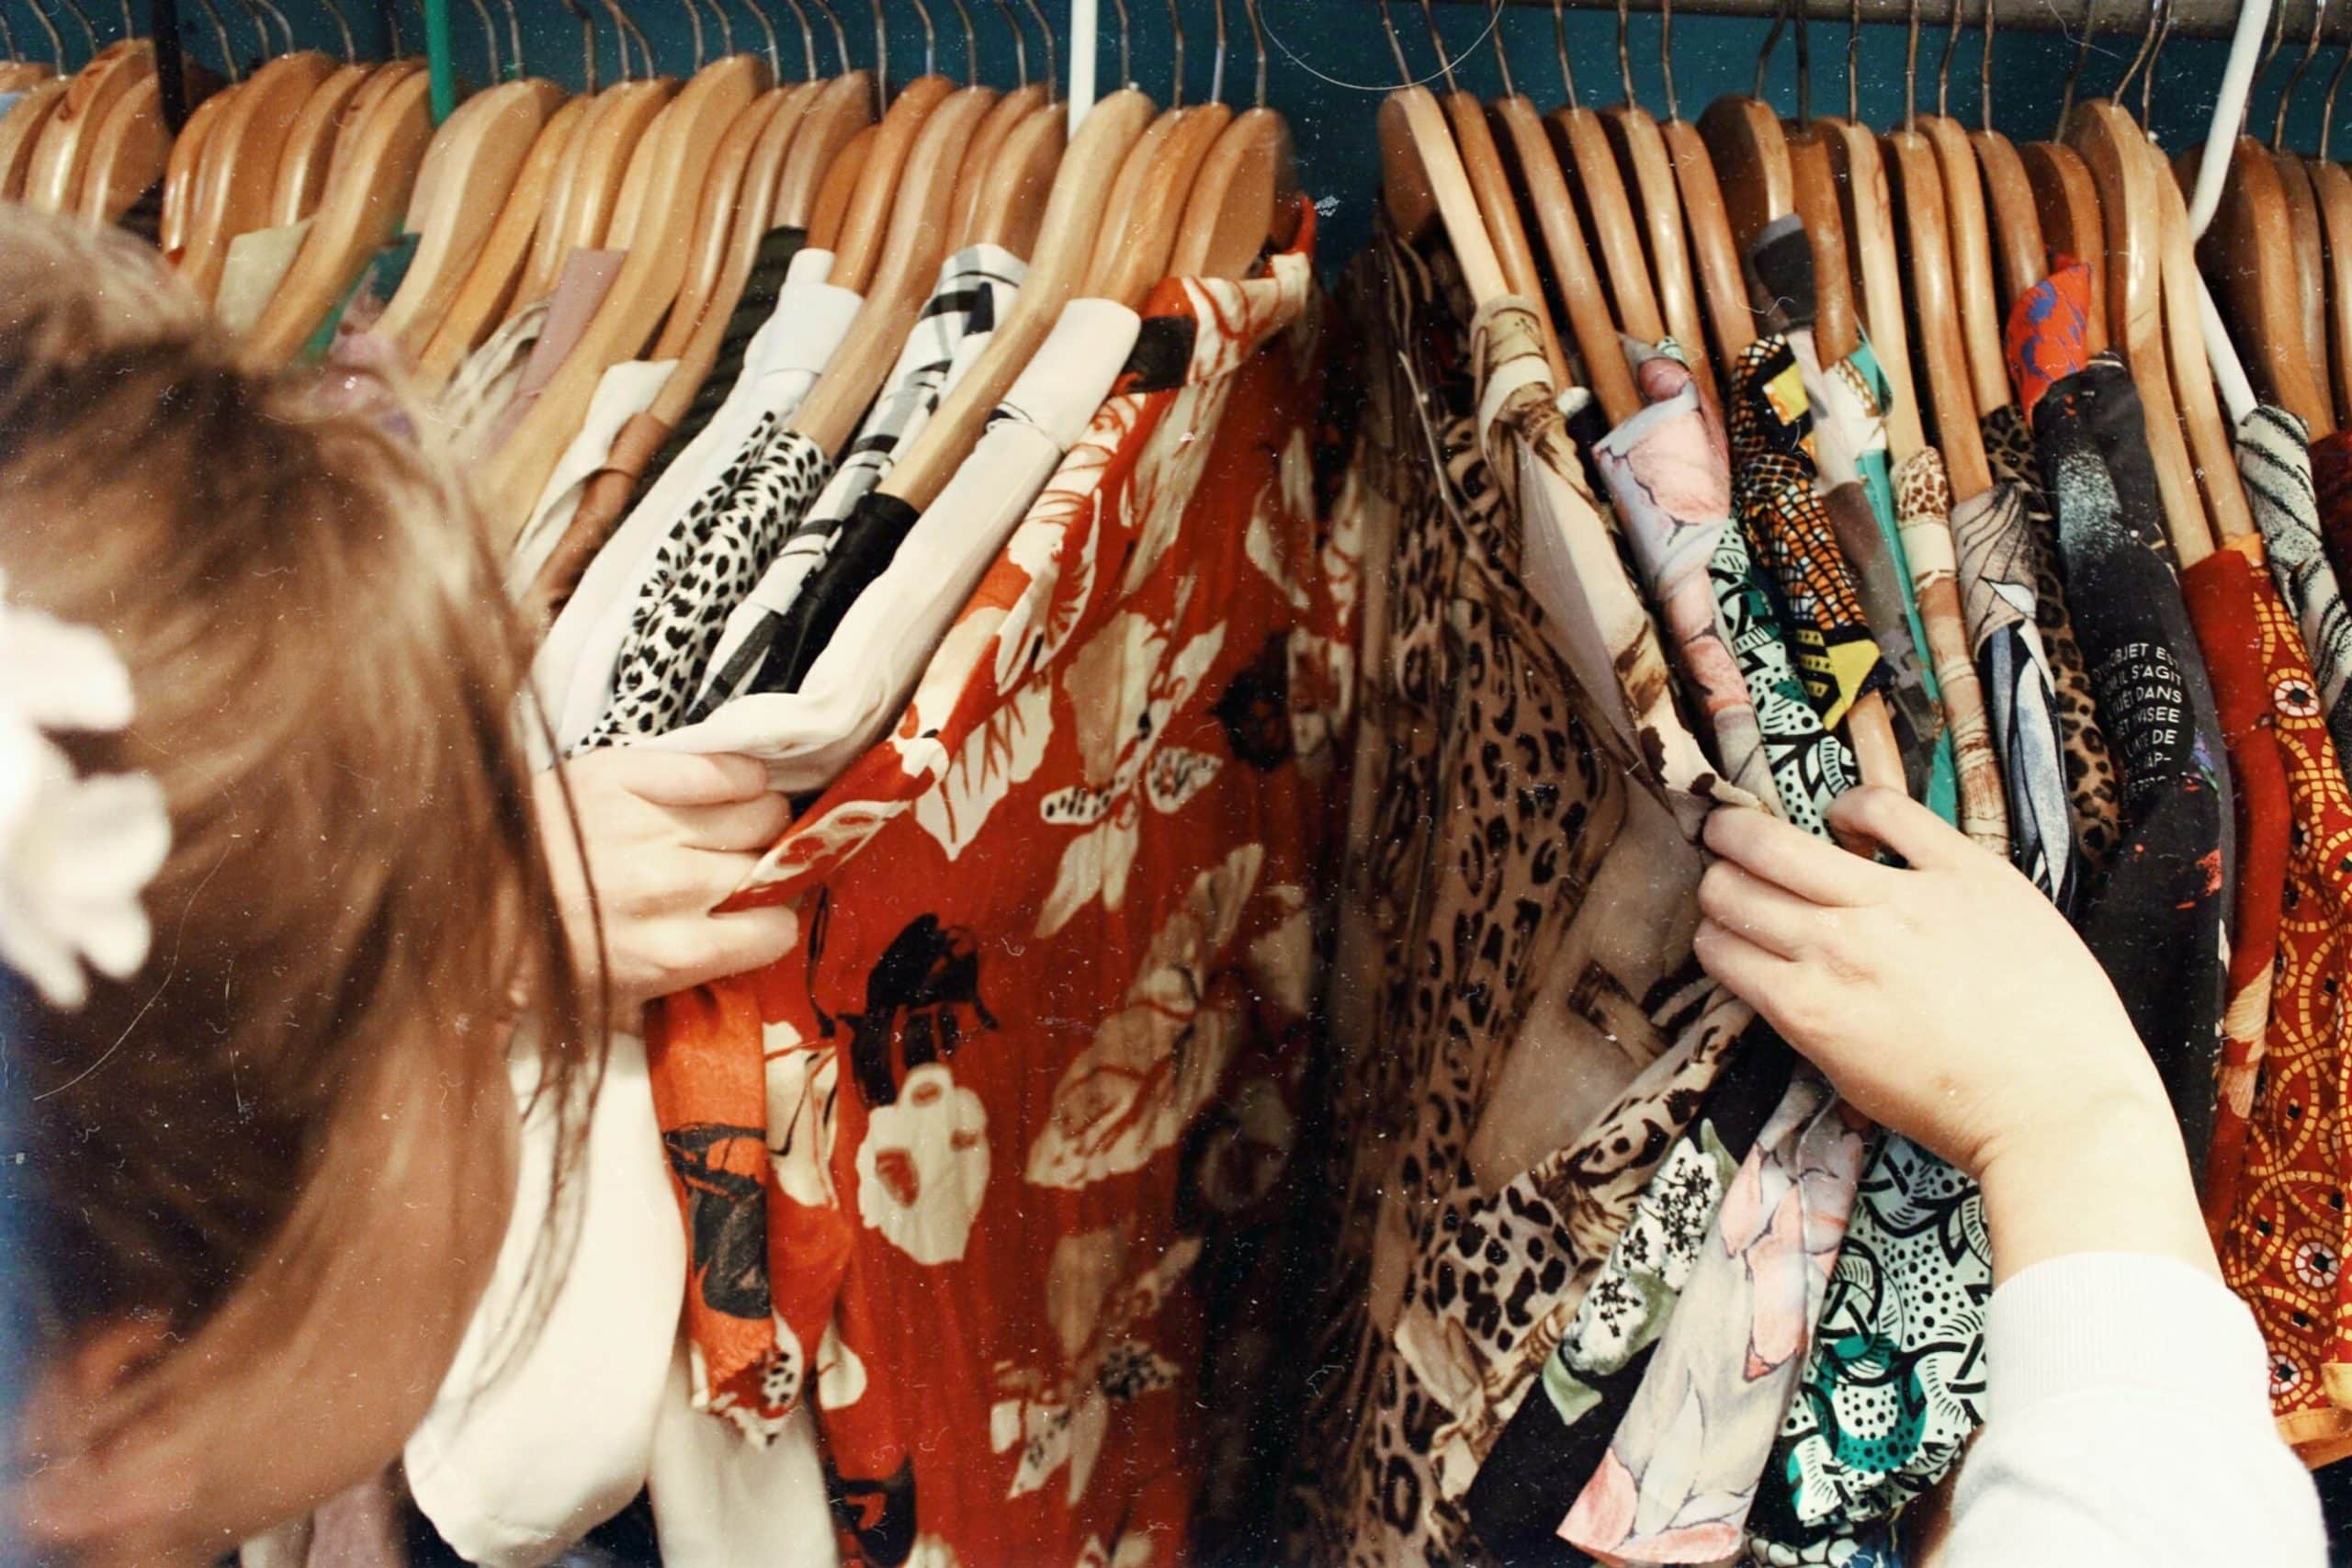 a woman is browsing through assorted styles of shirts and clothing on a rack in a shop